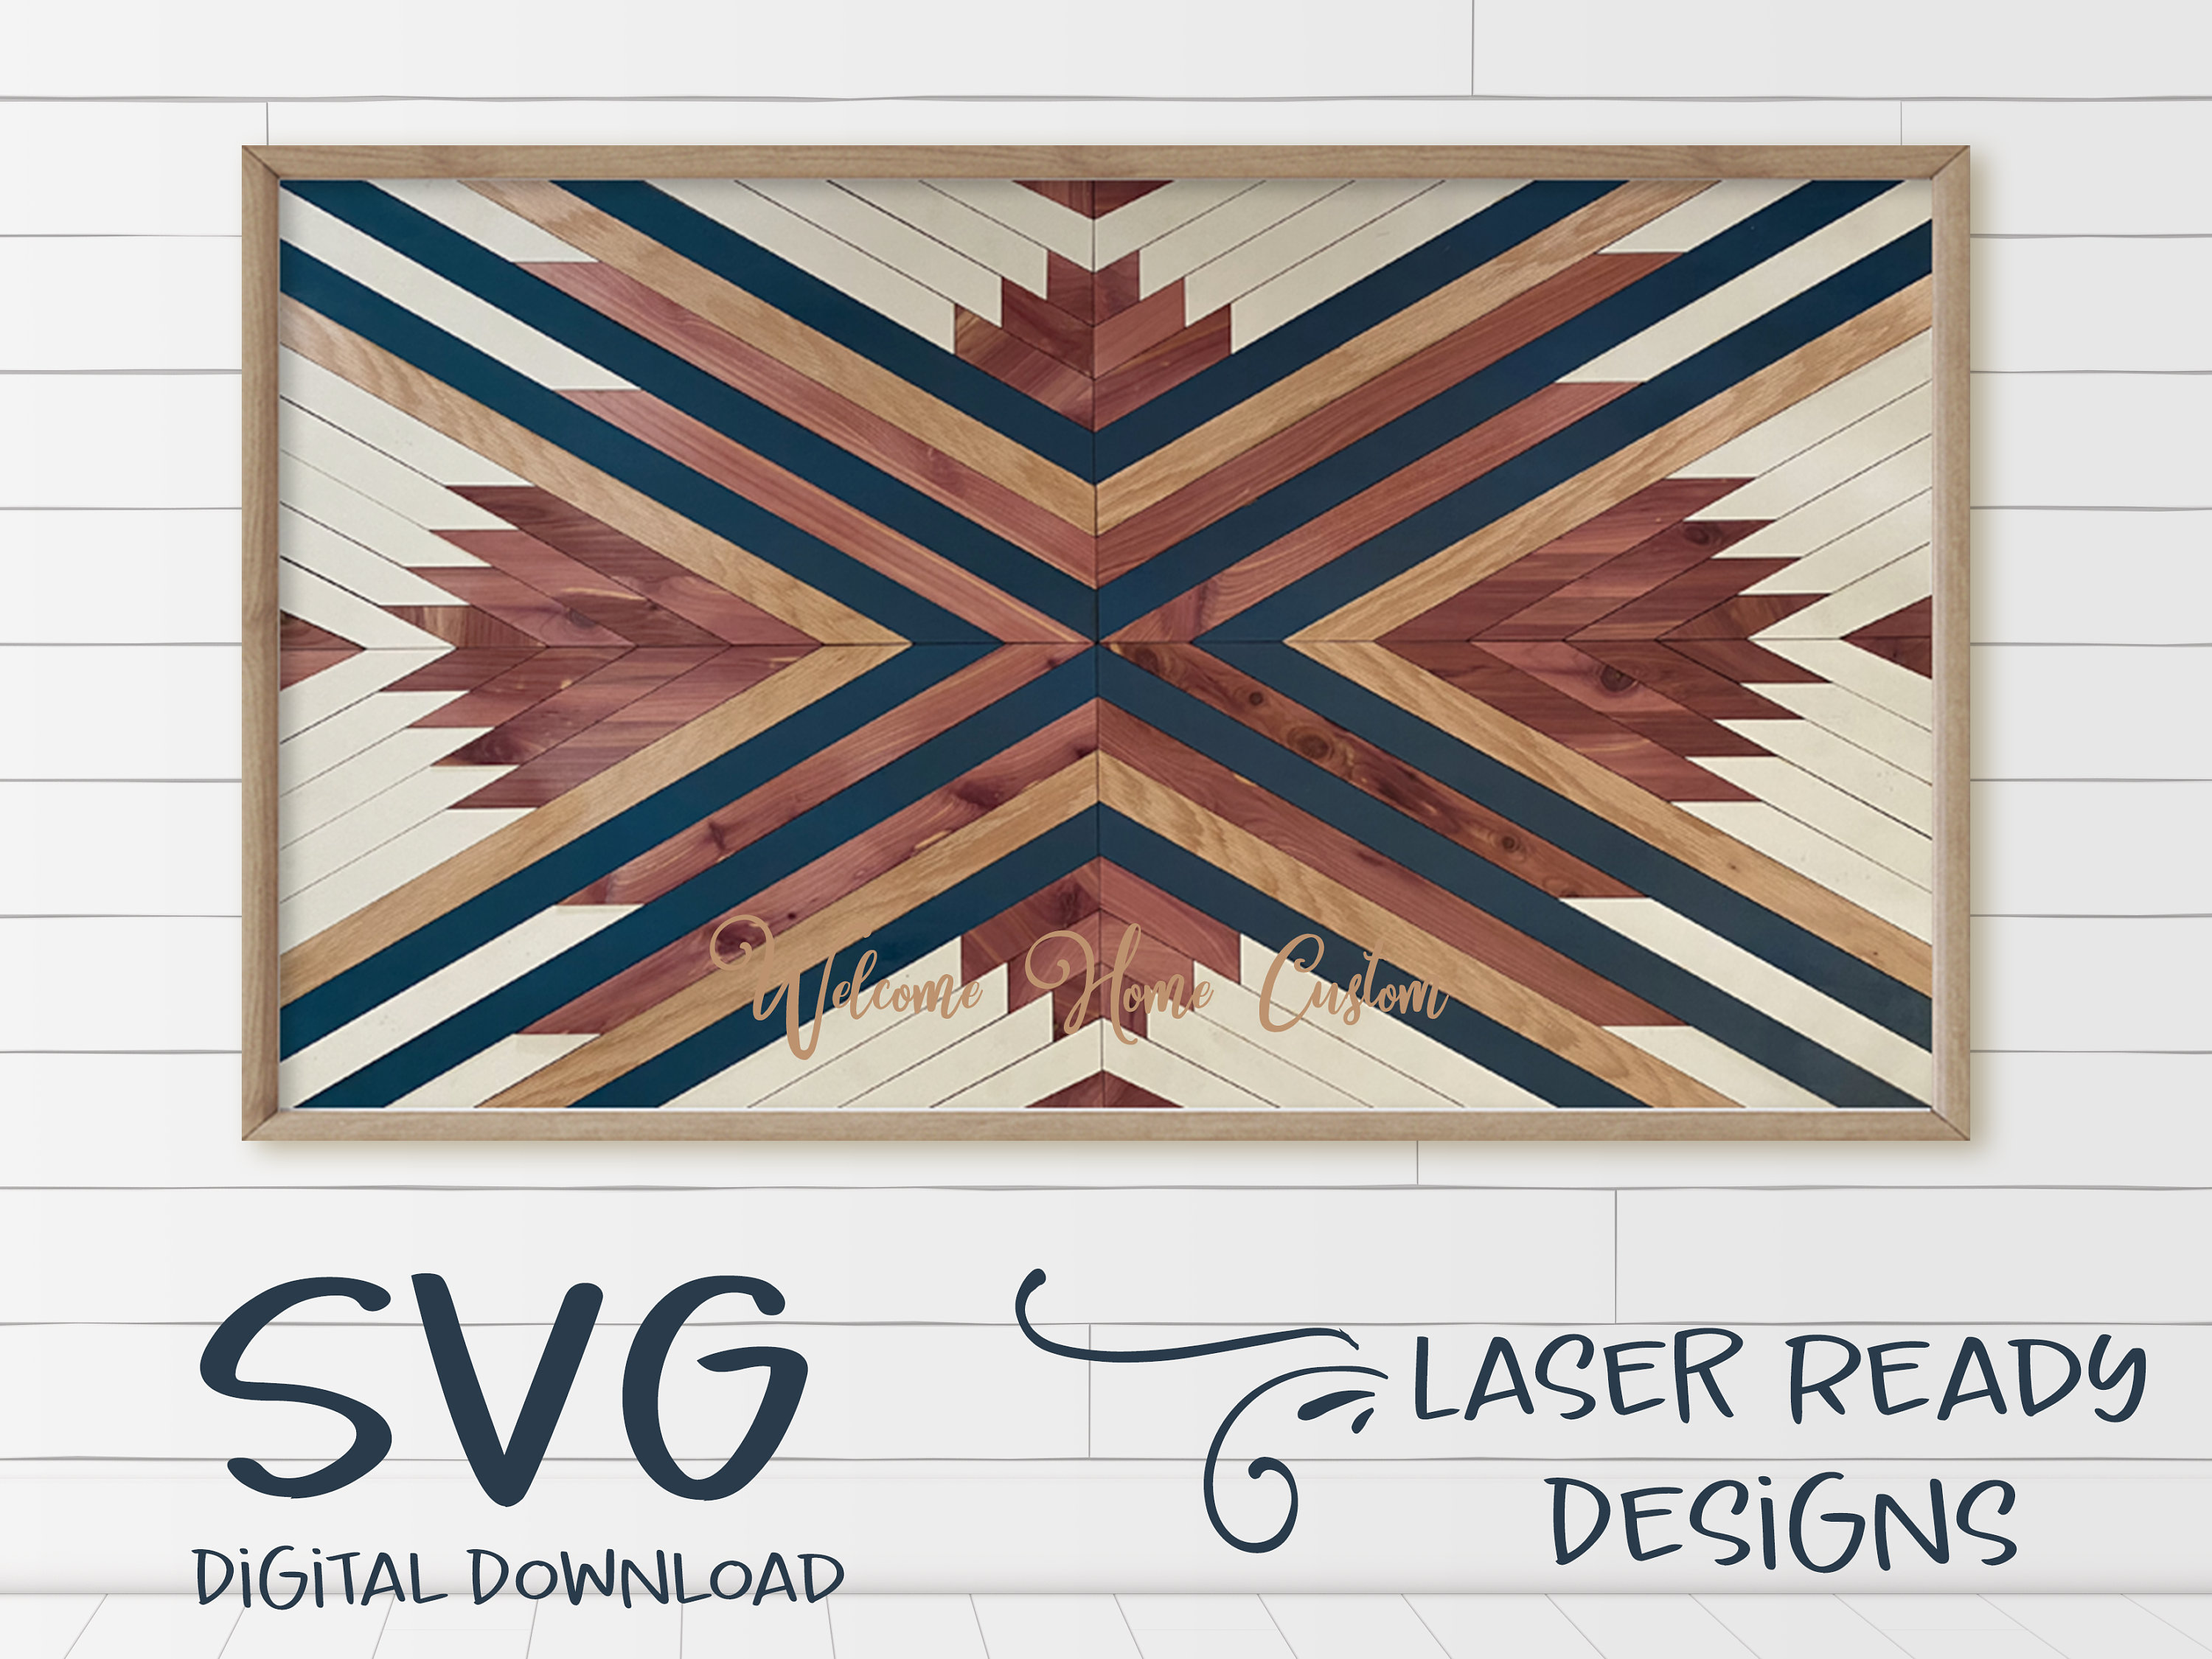 Download Aztec Barn Quilt Svg Laser Cut Files For Glowforge Projects Wall Art Laser Svg Files Wood Quilt For Glowforge Chevron Dxf Pdf 298 Drawing Illustration Art Collectibles Kromasol Com